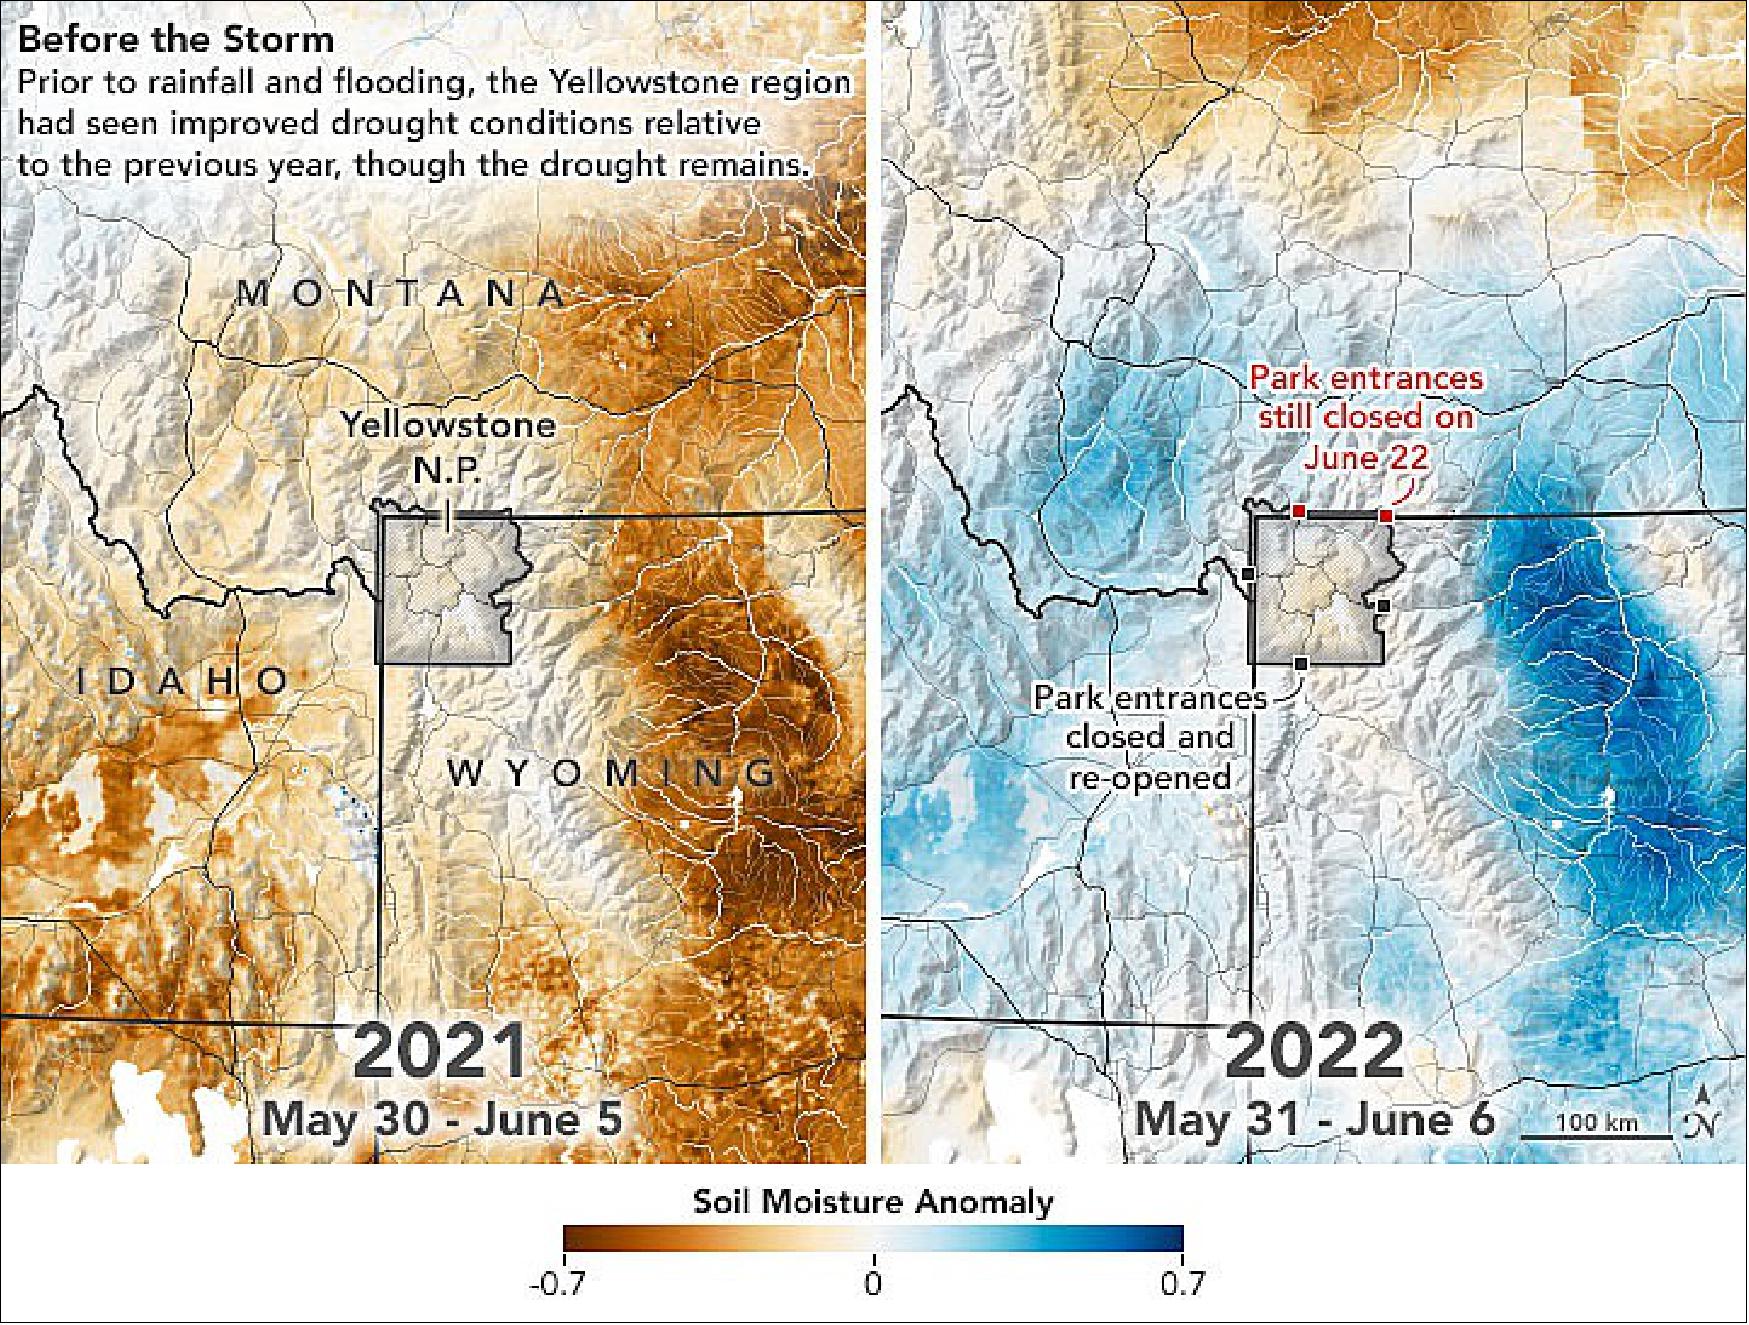 Figure 14: These maps show the soil moisture anomaly in northern Wyoming and southern Montana during the week before the storm. The maps were built with data from the Crop Condition and Soil Moisture Analytics (Crop-CASMA) product. Crop-CASMA integrates measurements from NASA's Soil Moisture Active Passive (SMAP) satellite and vegetation indices from the MODIS instruments on NASA's Terra and Aqua satellites. The left map shows soil moisture conditions between May 30 and June 5, 2021, when the state was experiencing more severe drought conditions. The image at right shows soil moisture conditions from May 31 to June 6, 2022, just before the rainfall (image credit: NASA Earth Observatory)